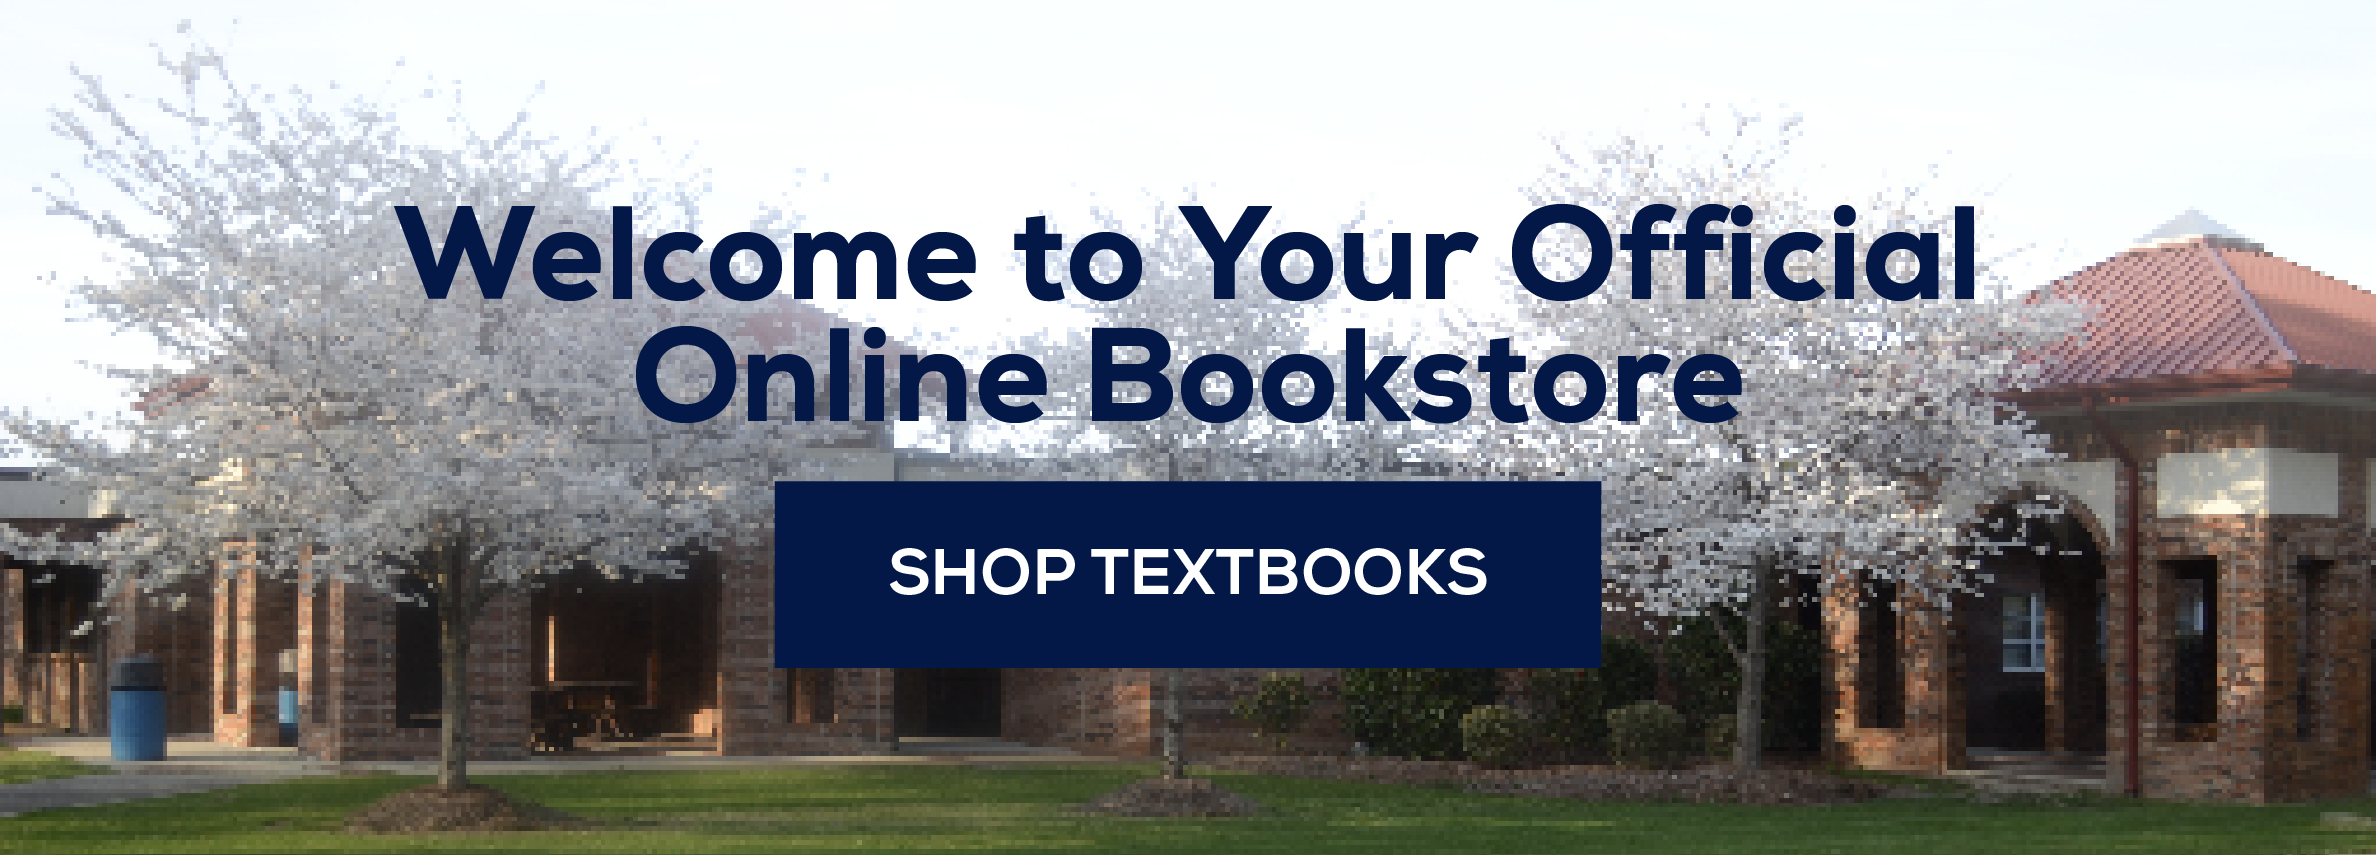 Welcome to your official online bookstore. shop textbooks